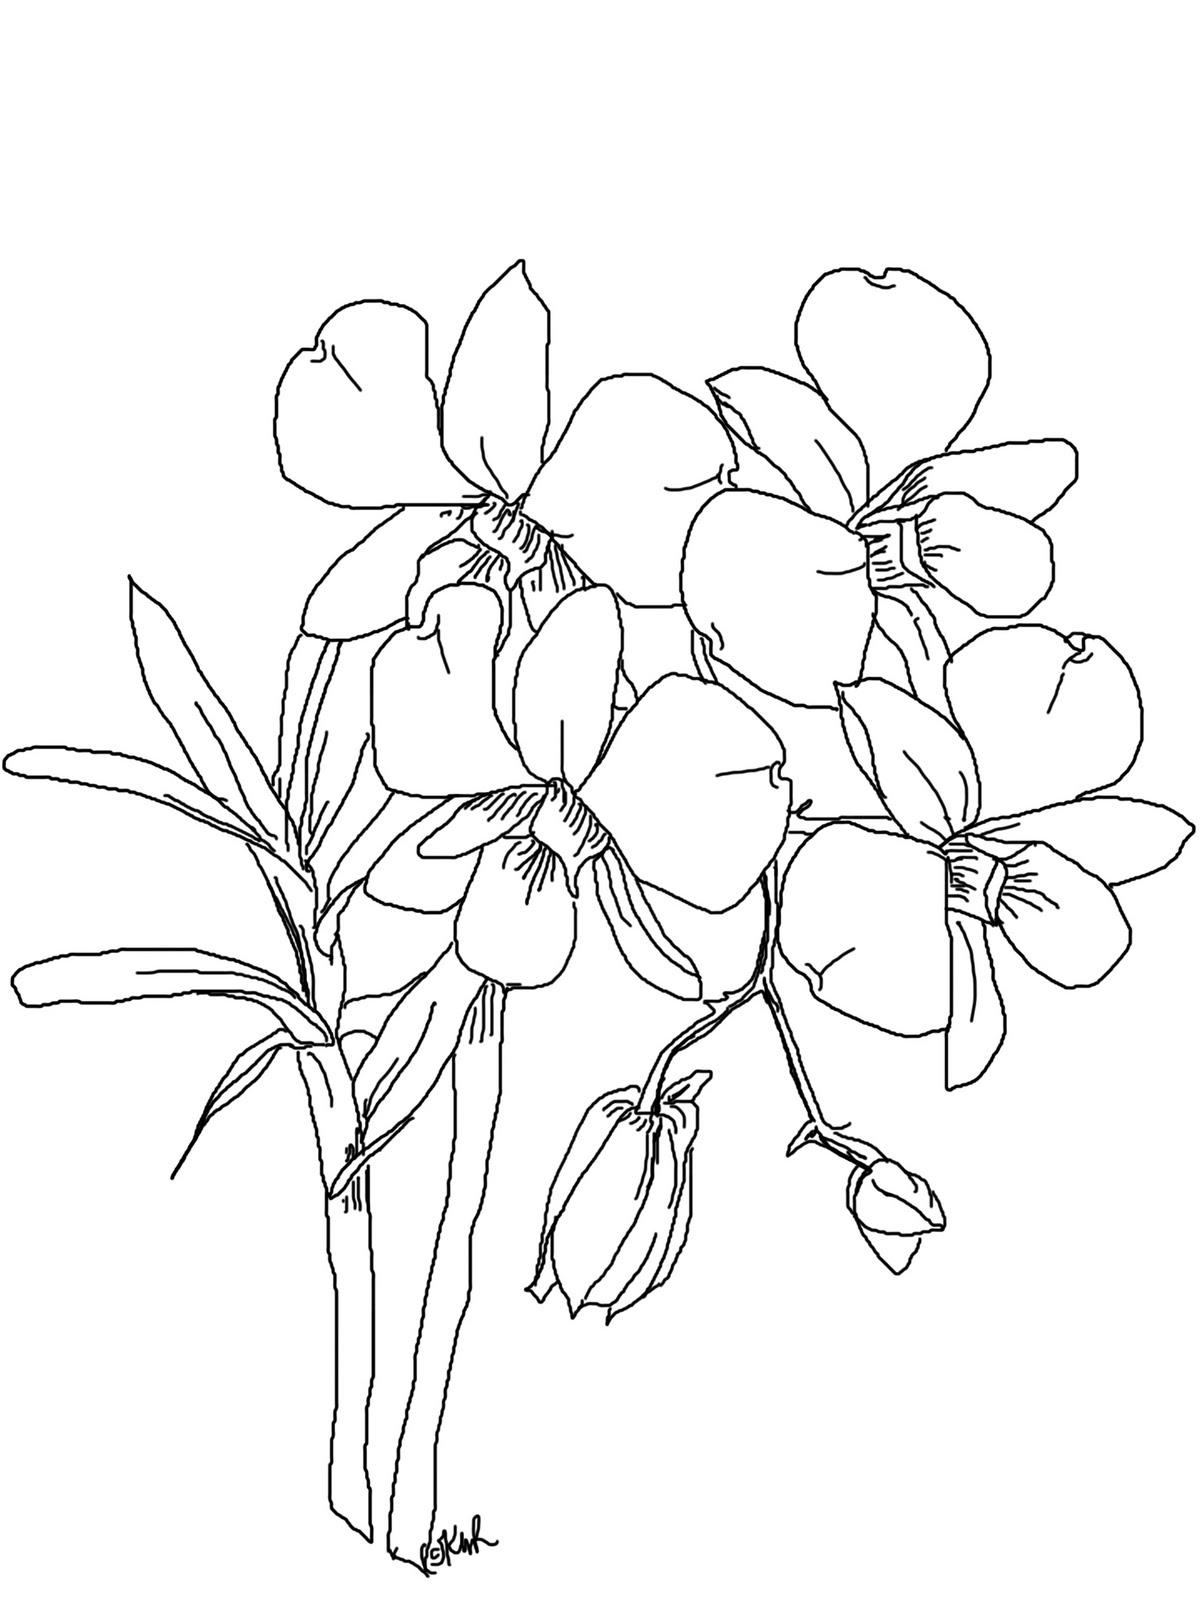 New Printable Lotus Flowers Coloring Page